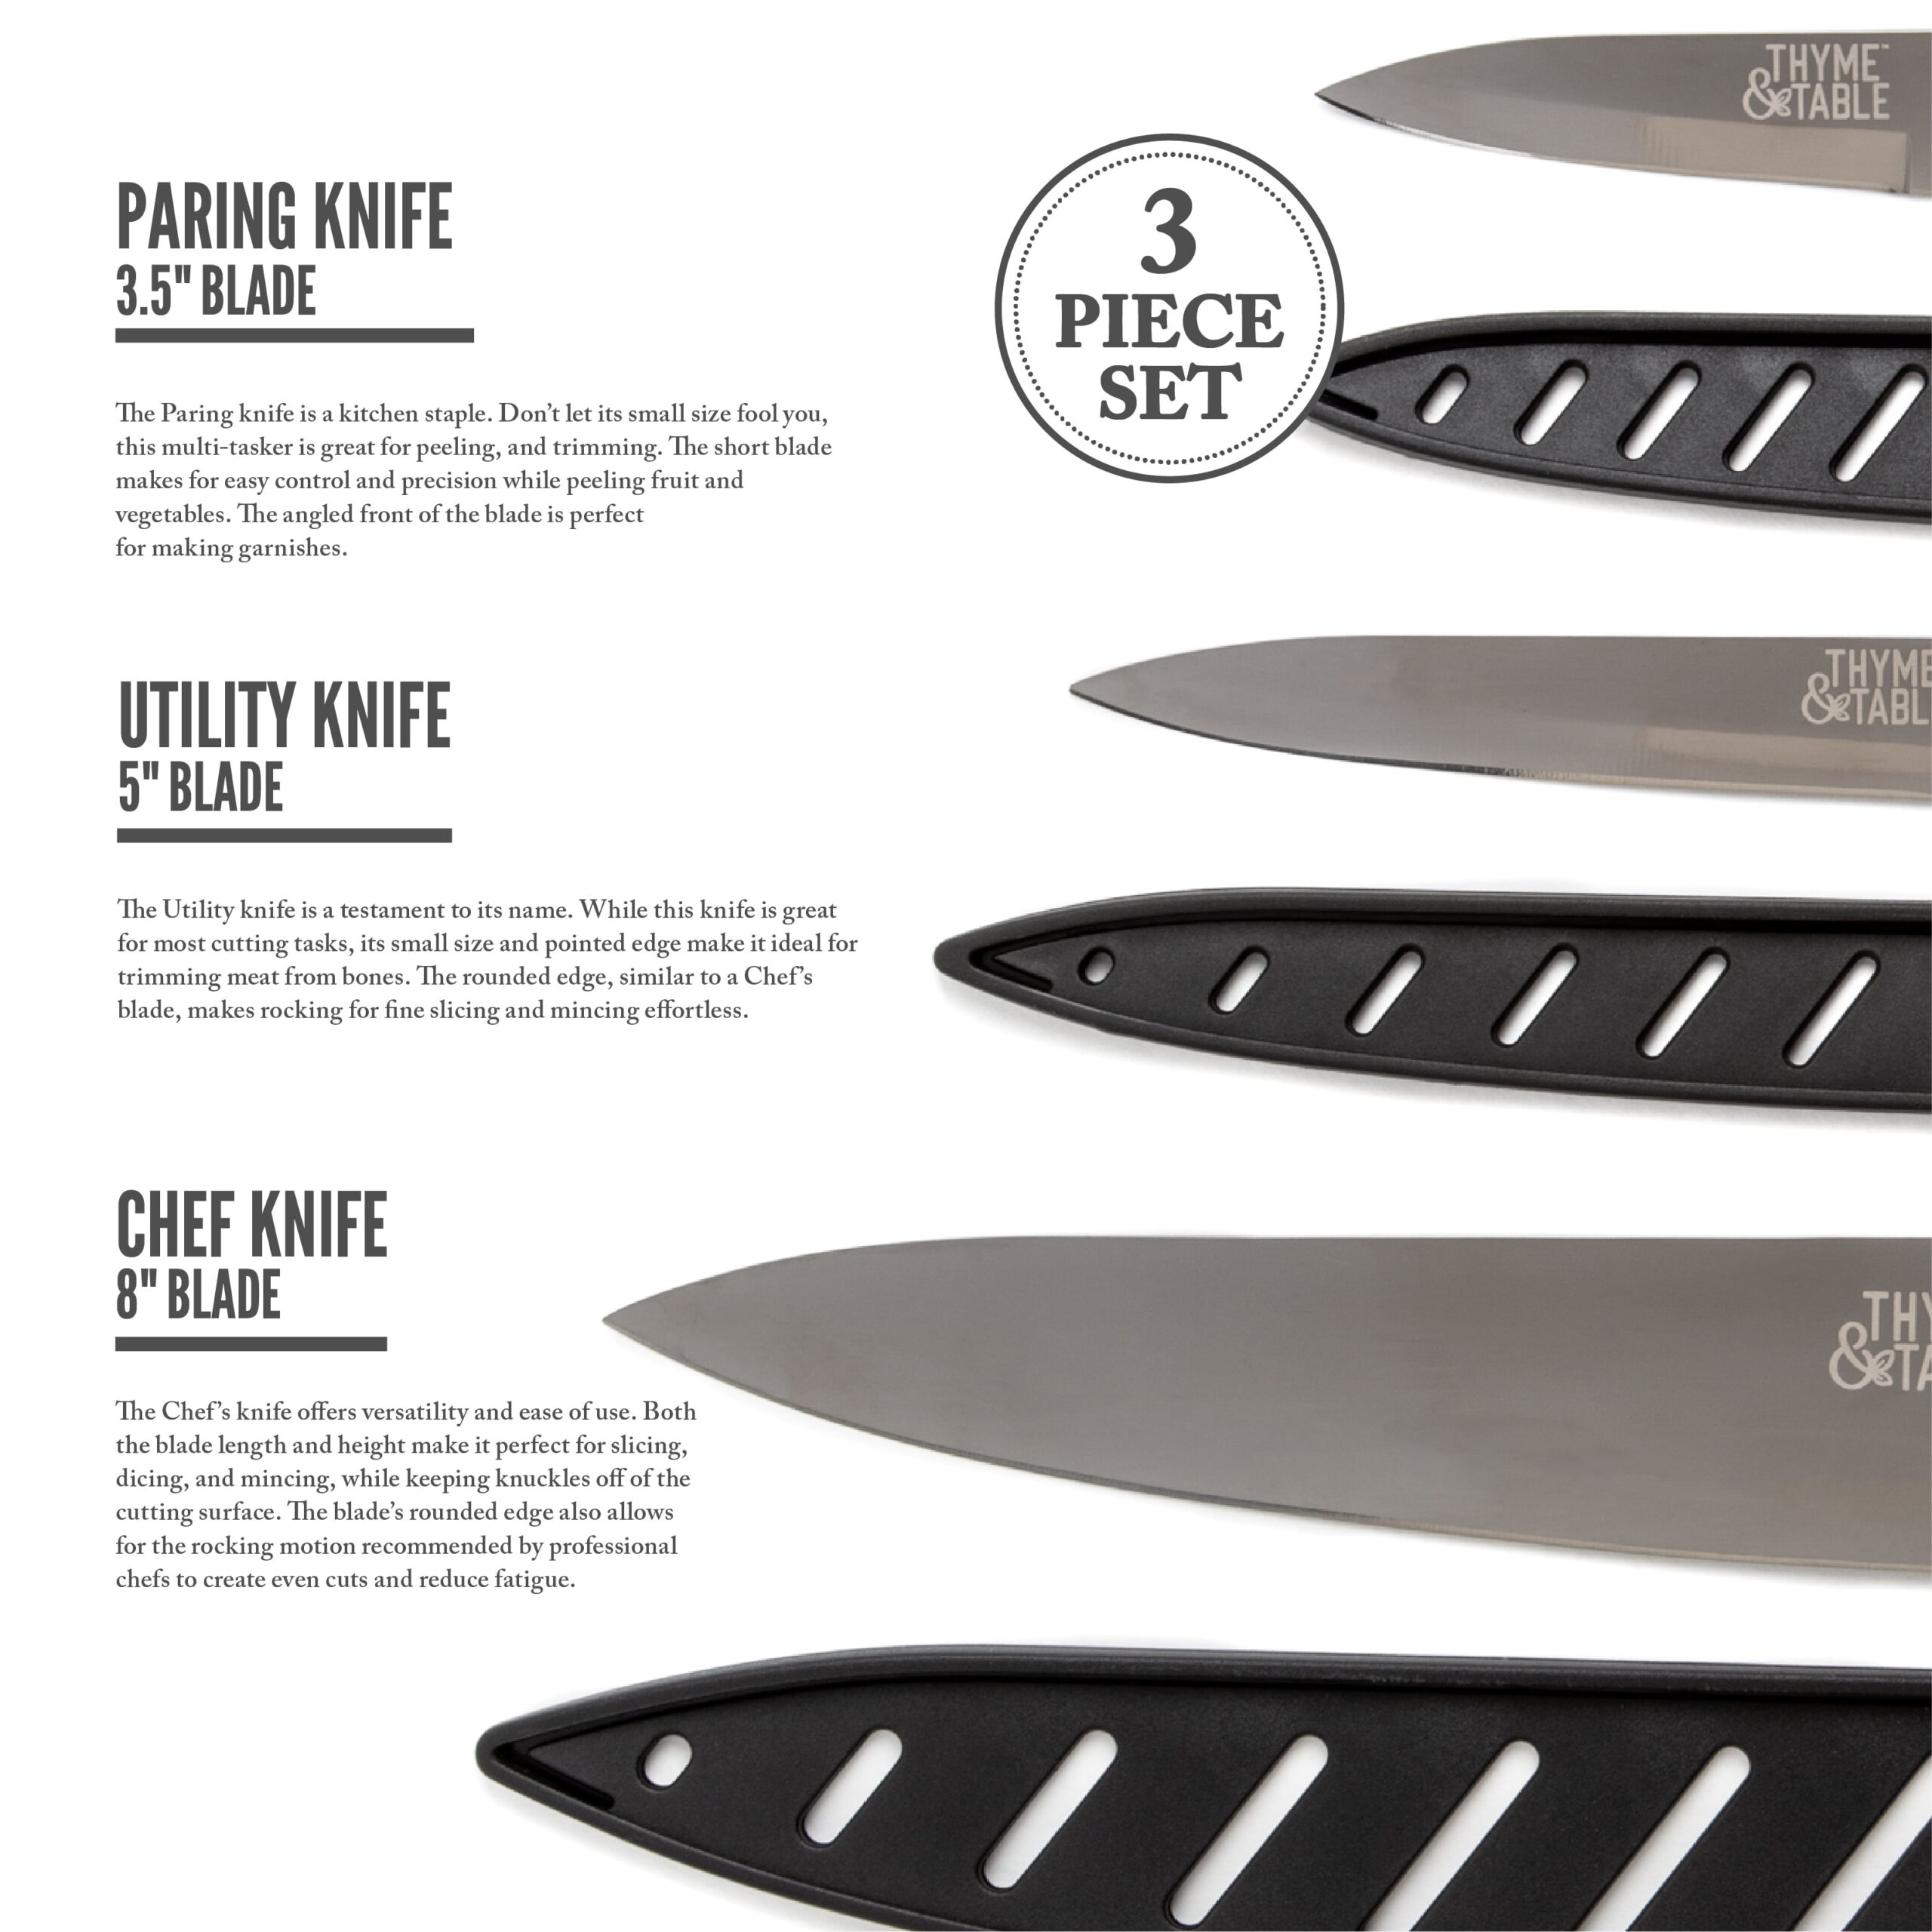  Luxury Carbon Stainless Steel Knife Set 3pc.- Thyme & Table,  TT0031: Home & Kitchen